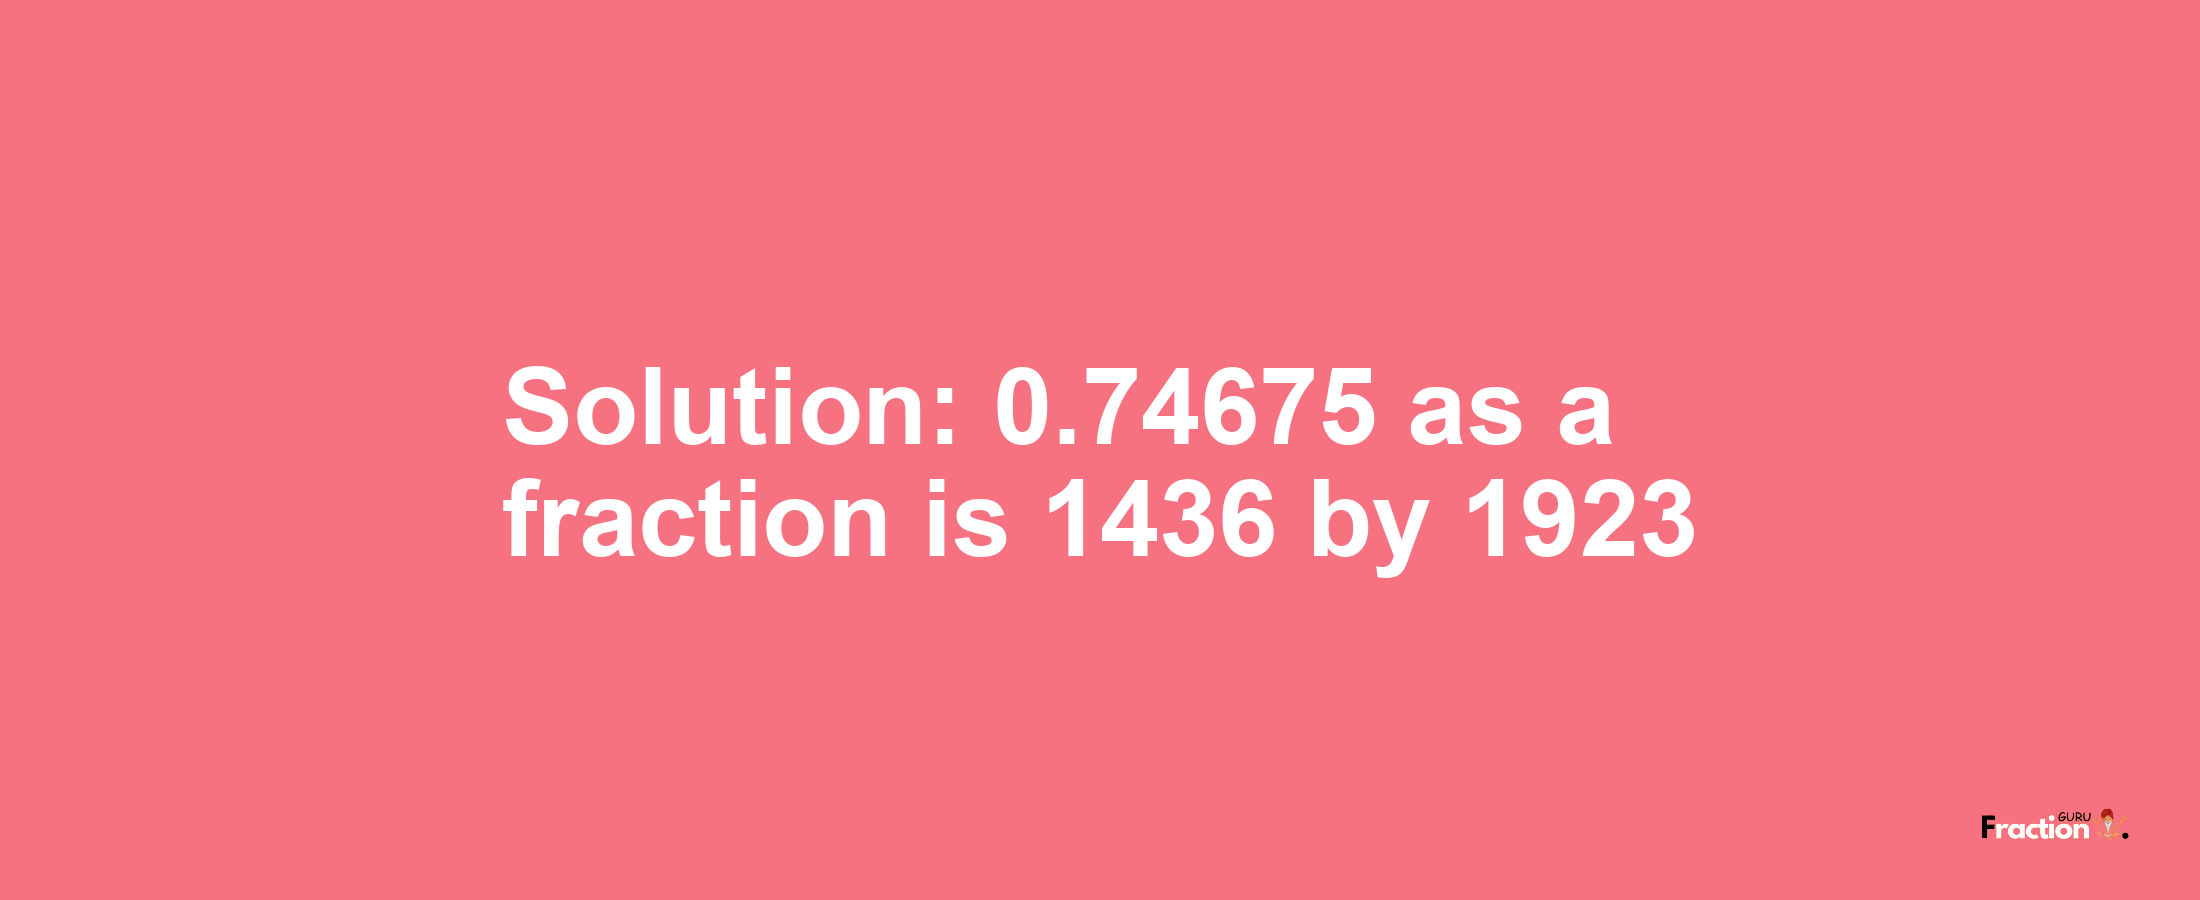 Solution:0.74675 as a fraction is 1436/1923